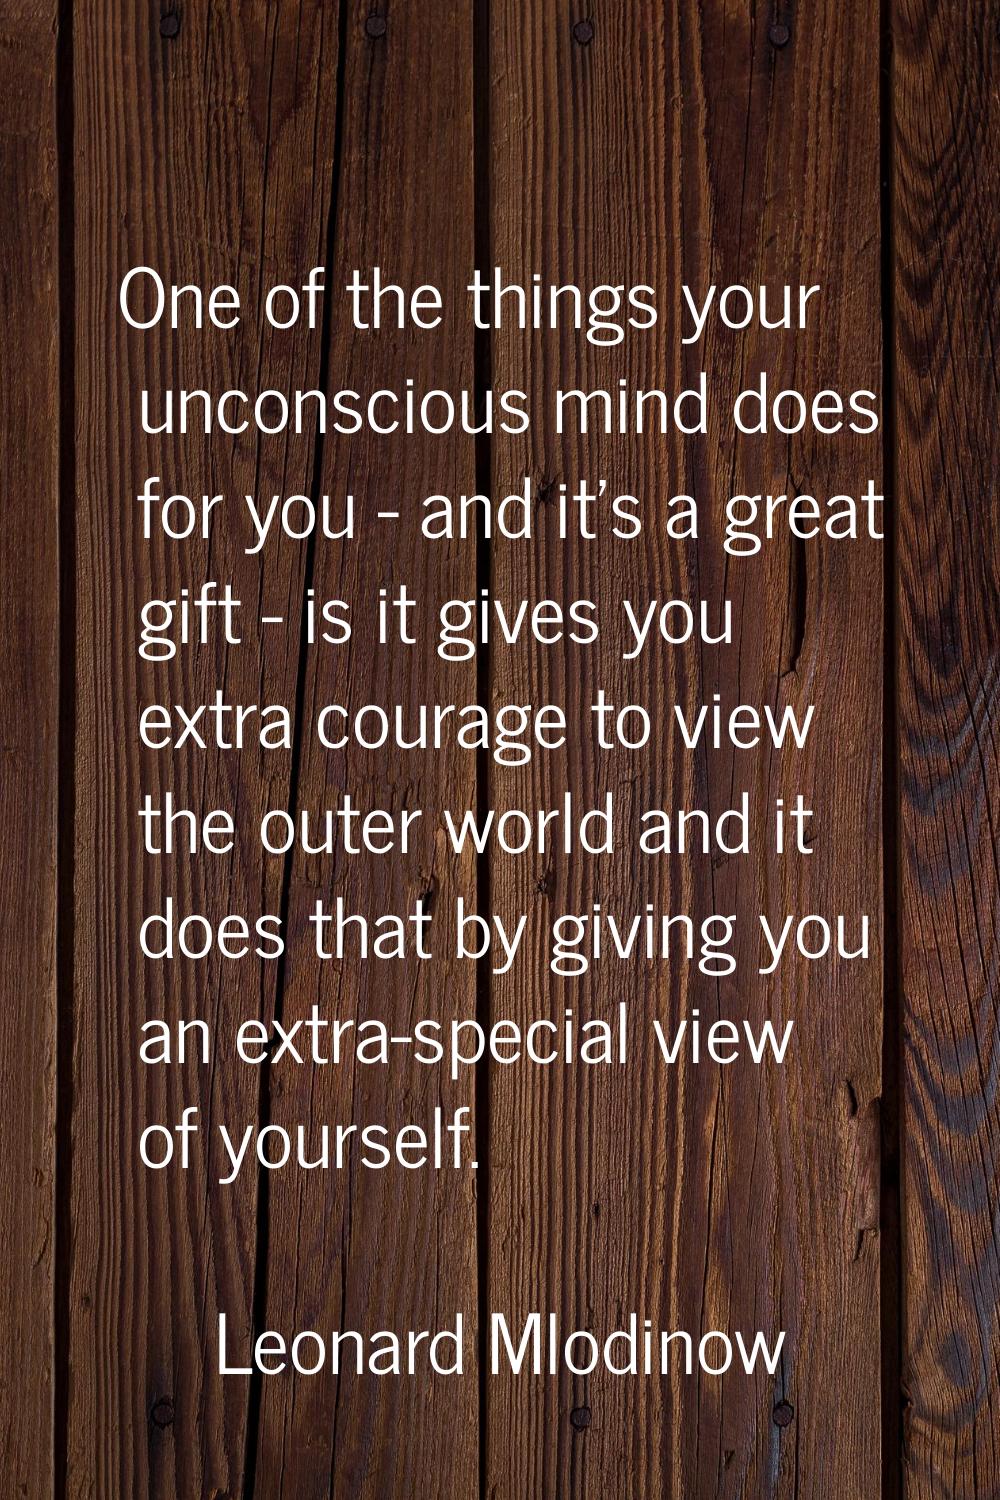 One of the things your unconscious mind does for you - and it's a great gift - is it gives you extr